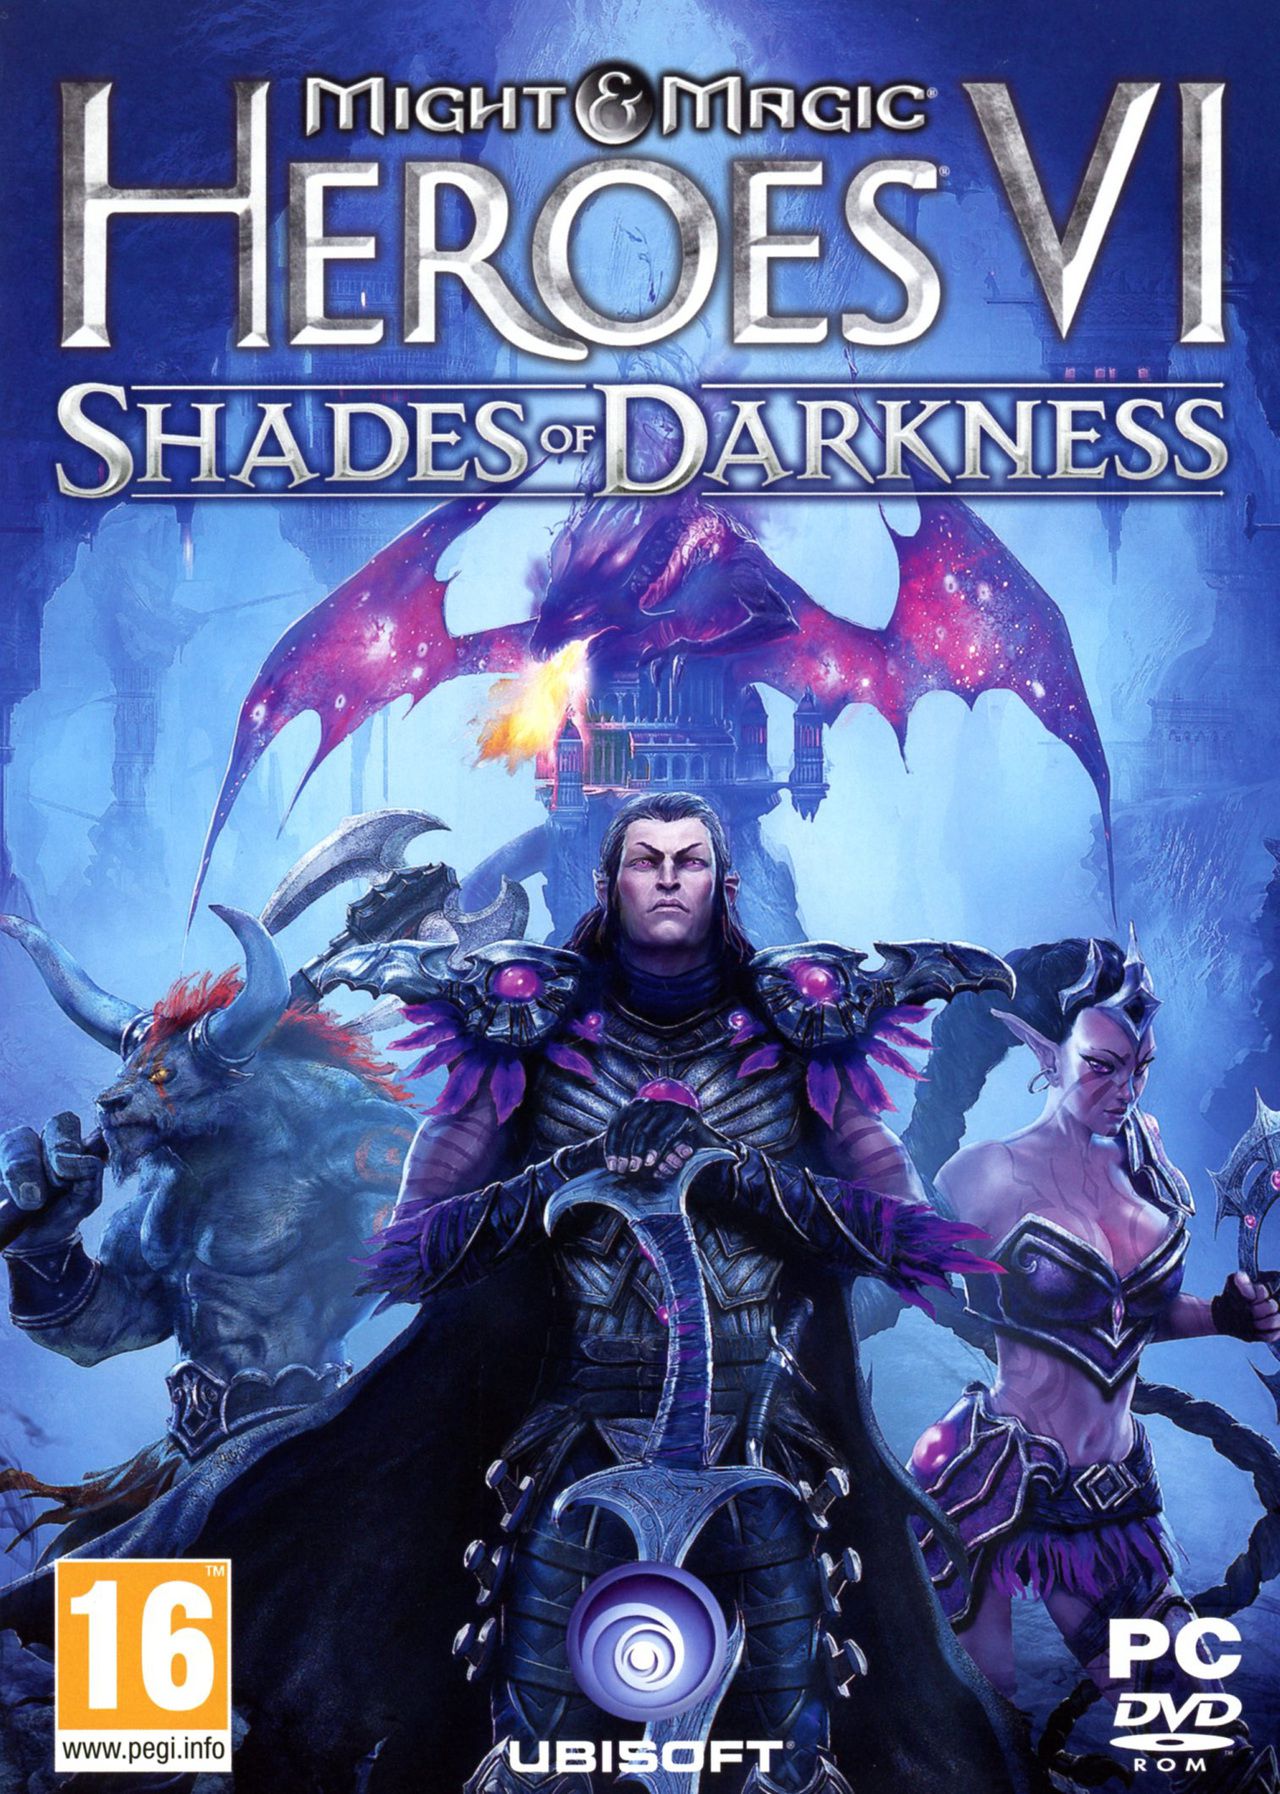 Might & Magic Heroes VI : Shades of Darkness (2013)  - Jeu vidéo streaming VF gratuit complet